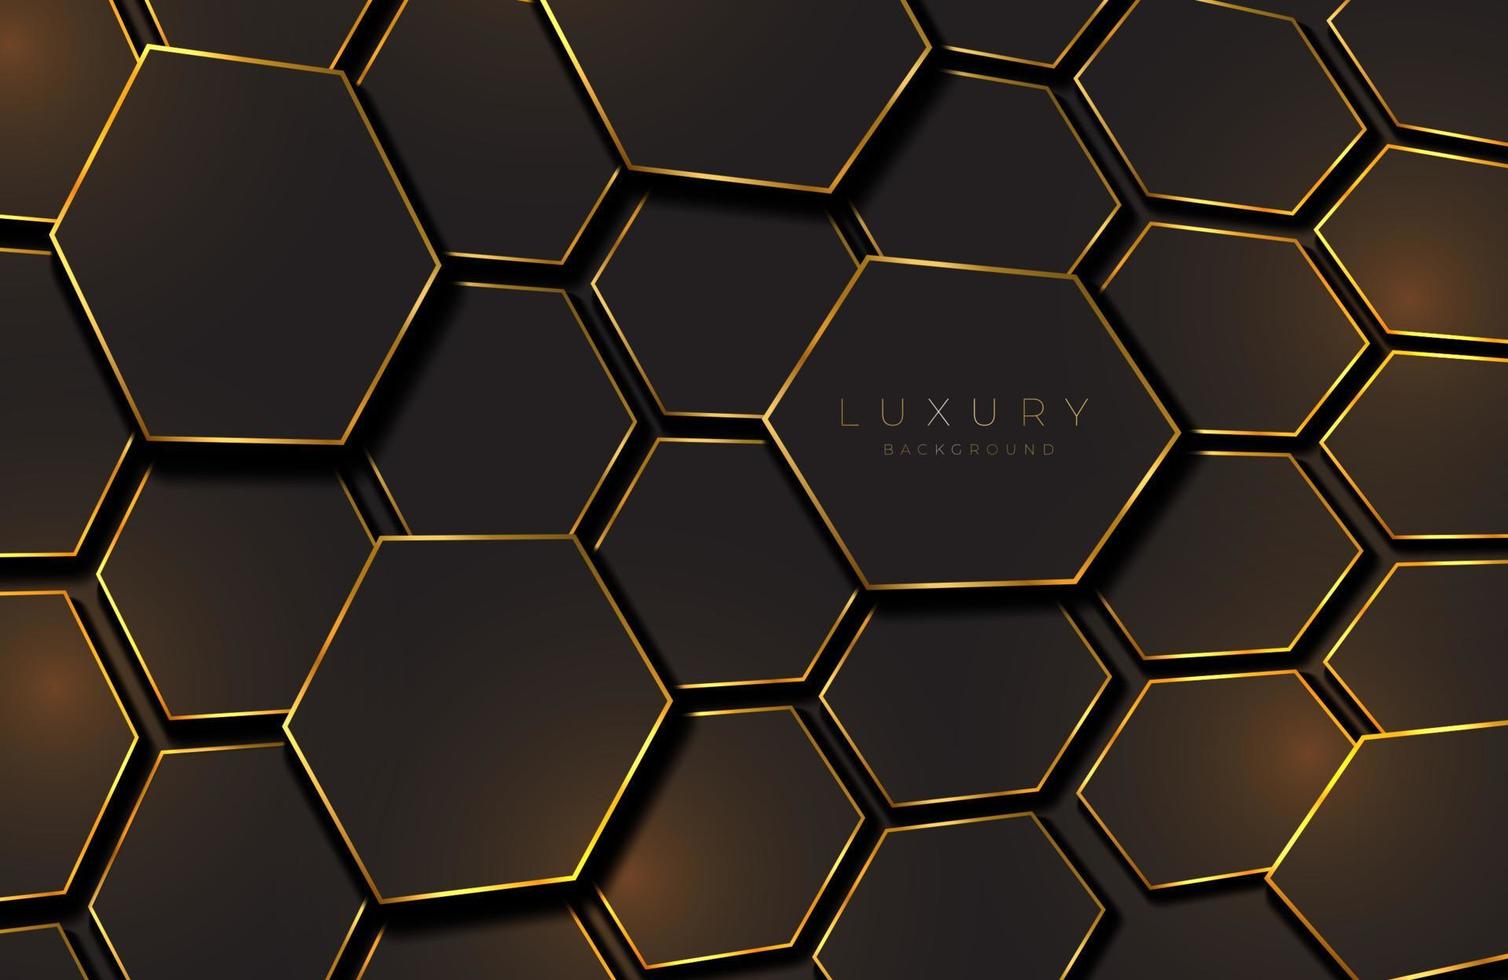 Modern abstract geometric black background with gold metal element vector